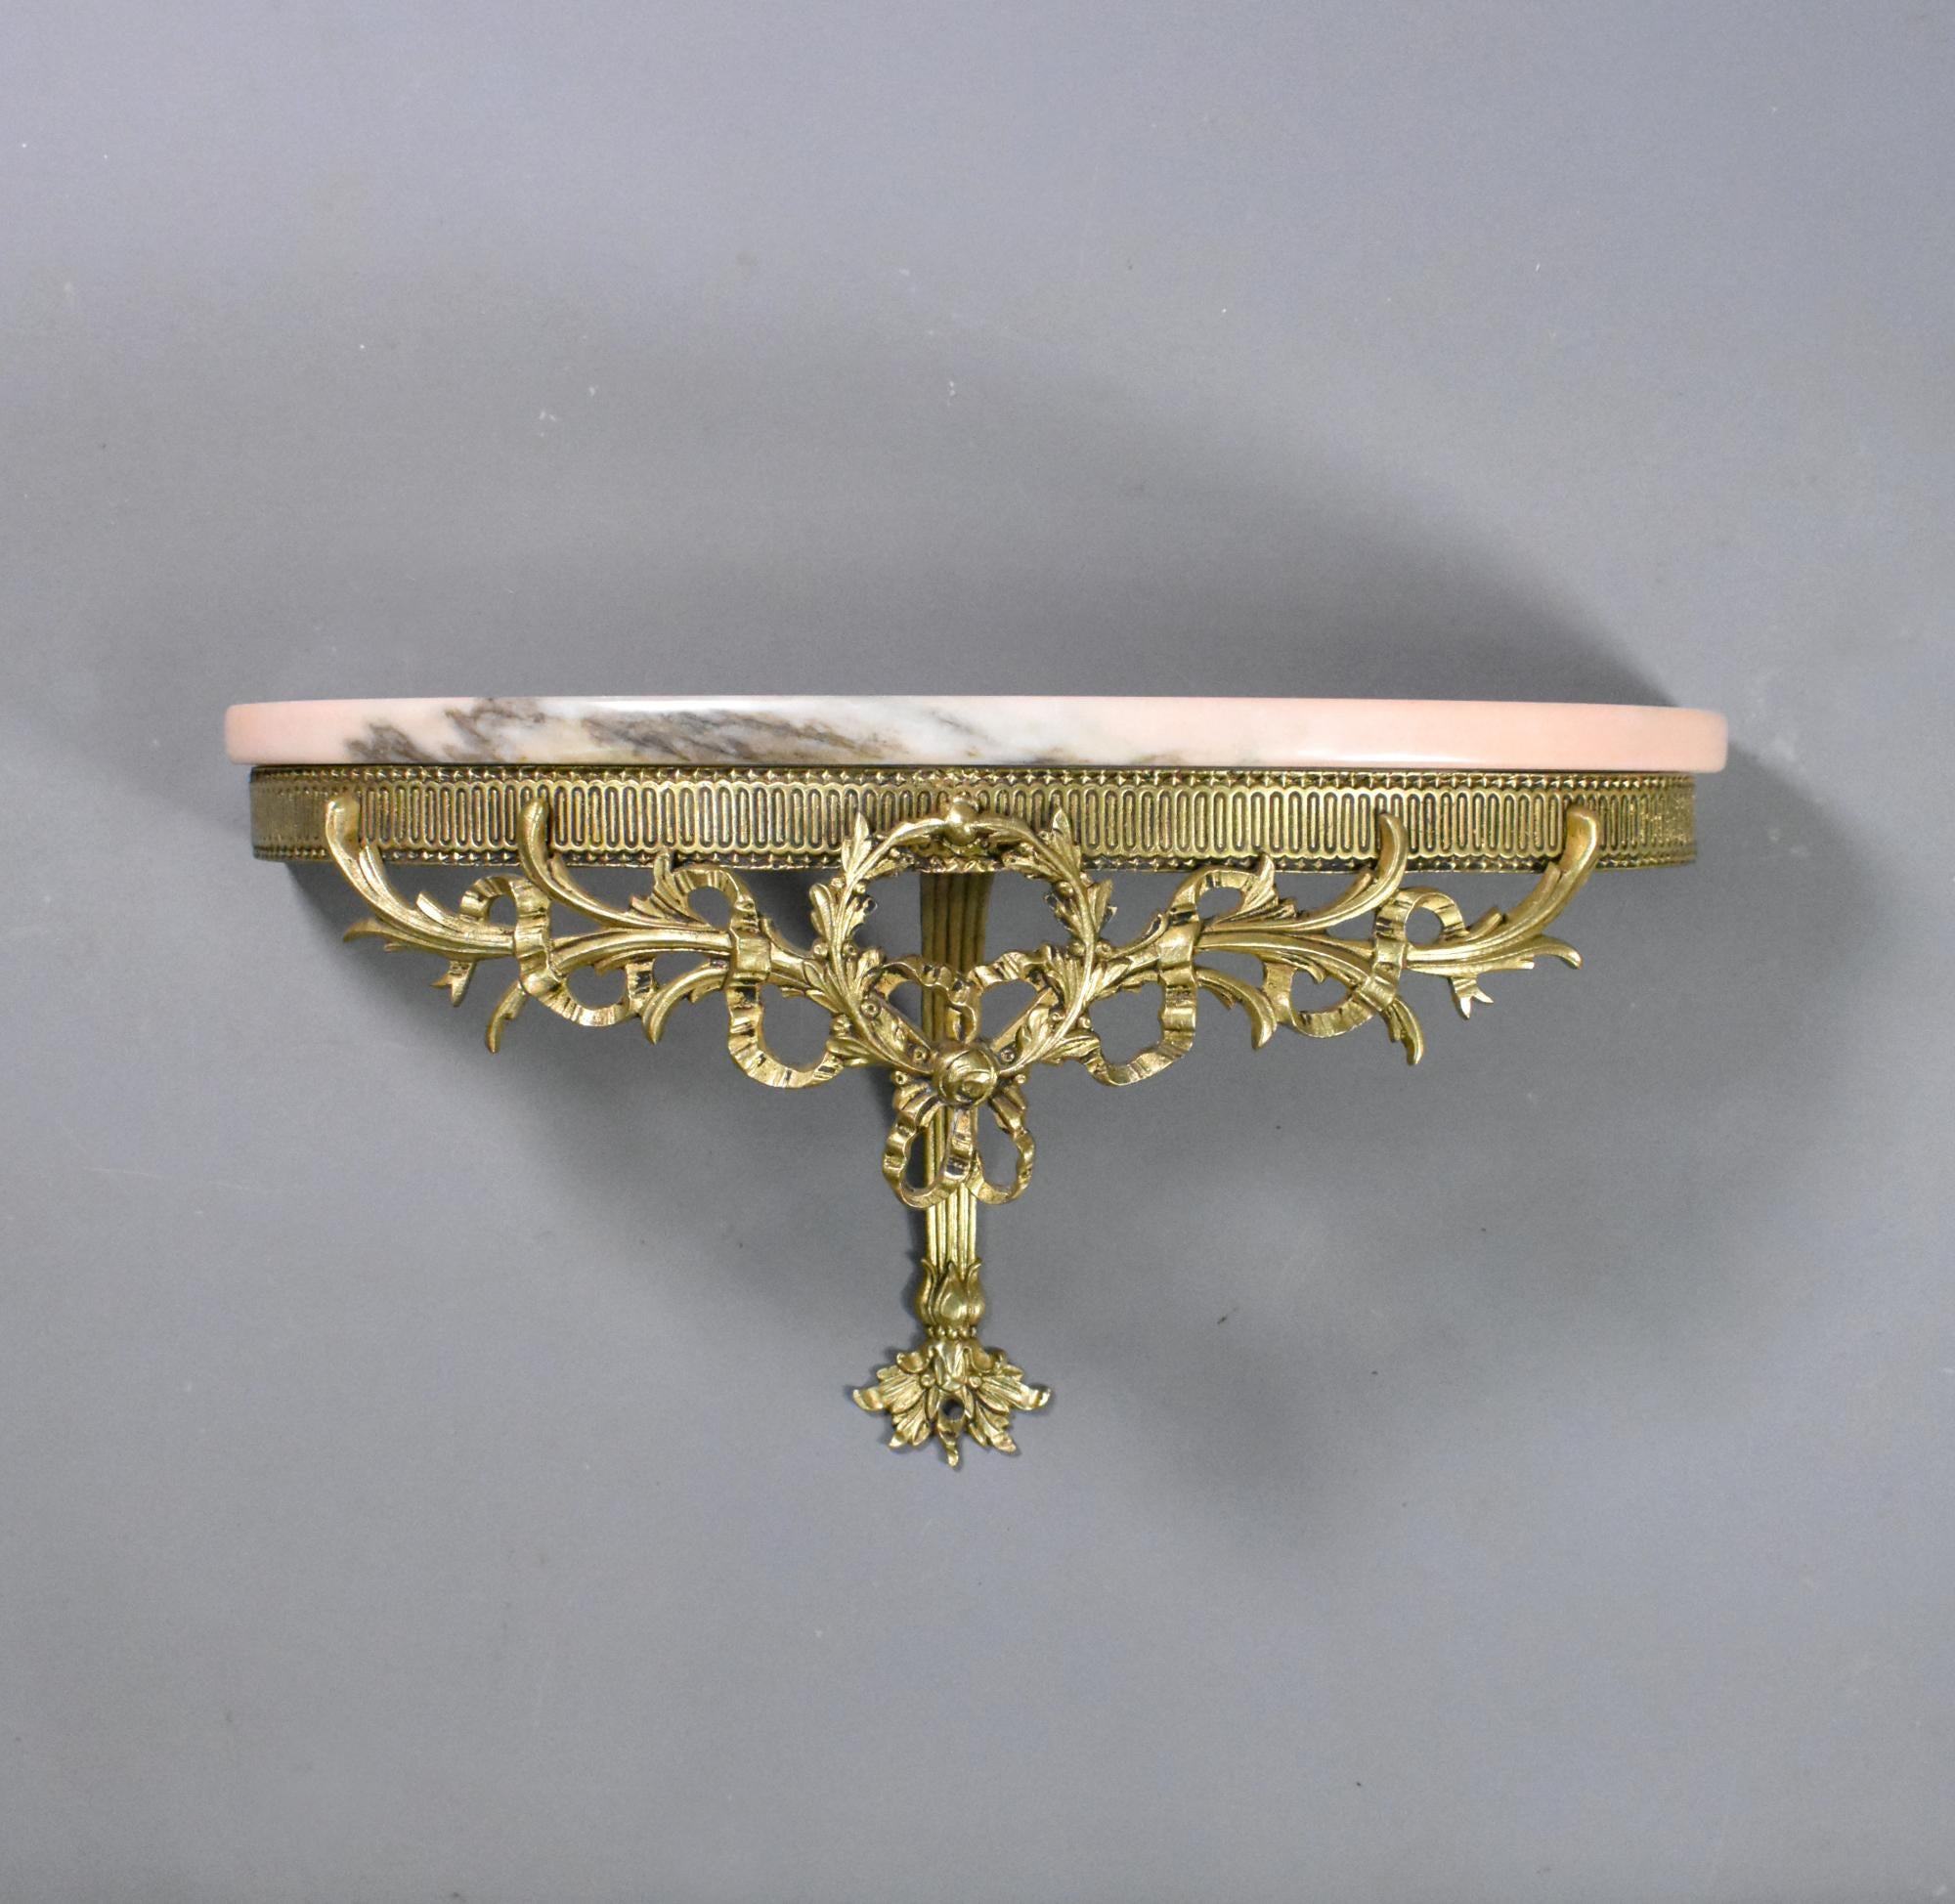 French Antique Bronze and Marble Wall Console Louis XVI Style 19th Century
 
A delightful bronze and marble wall console featuring a pink variegated demilune top.
 
The marble sits on a finely decorated bronze support with a curved central arm